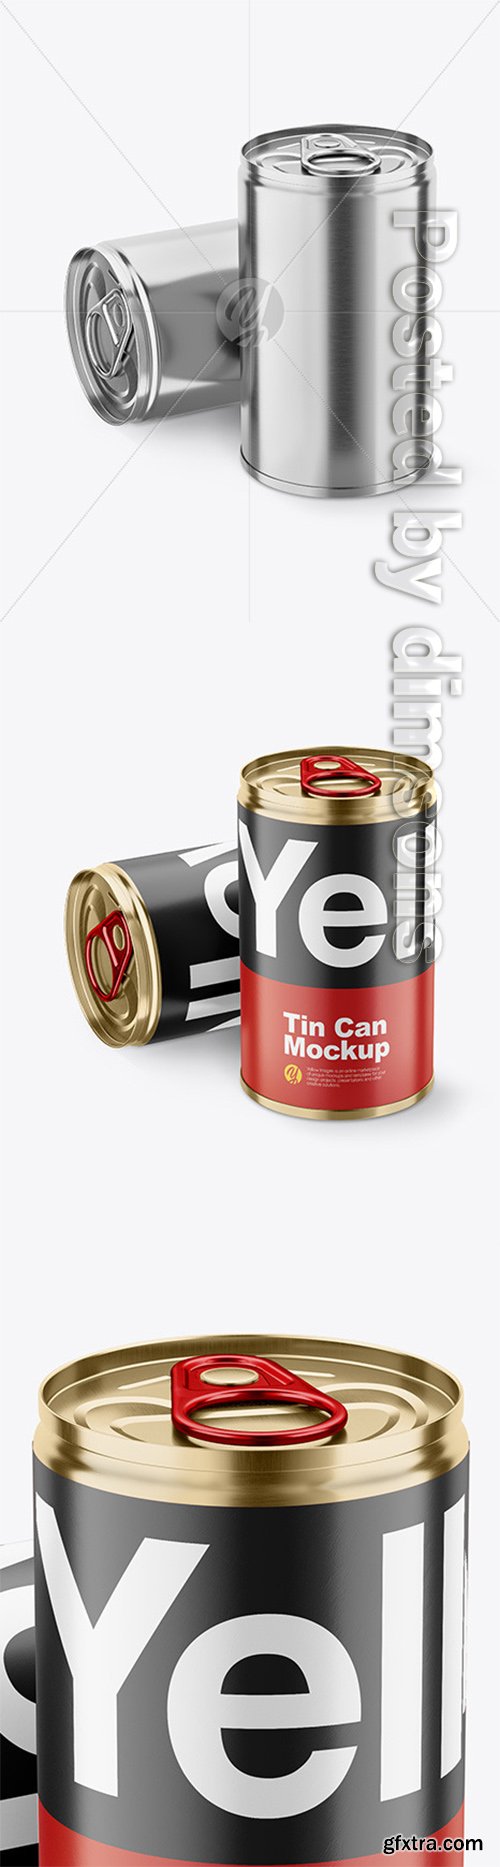 Two Tin Cans w/ Pull Tab Mockup 49297